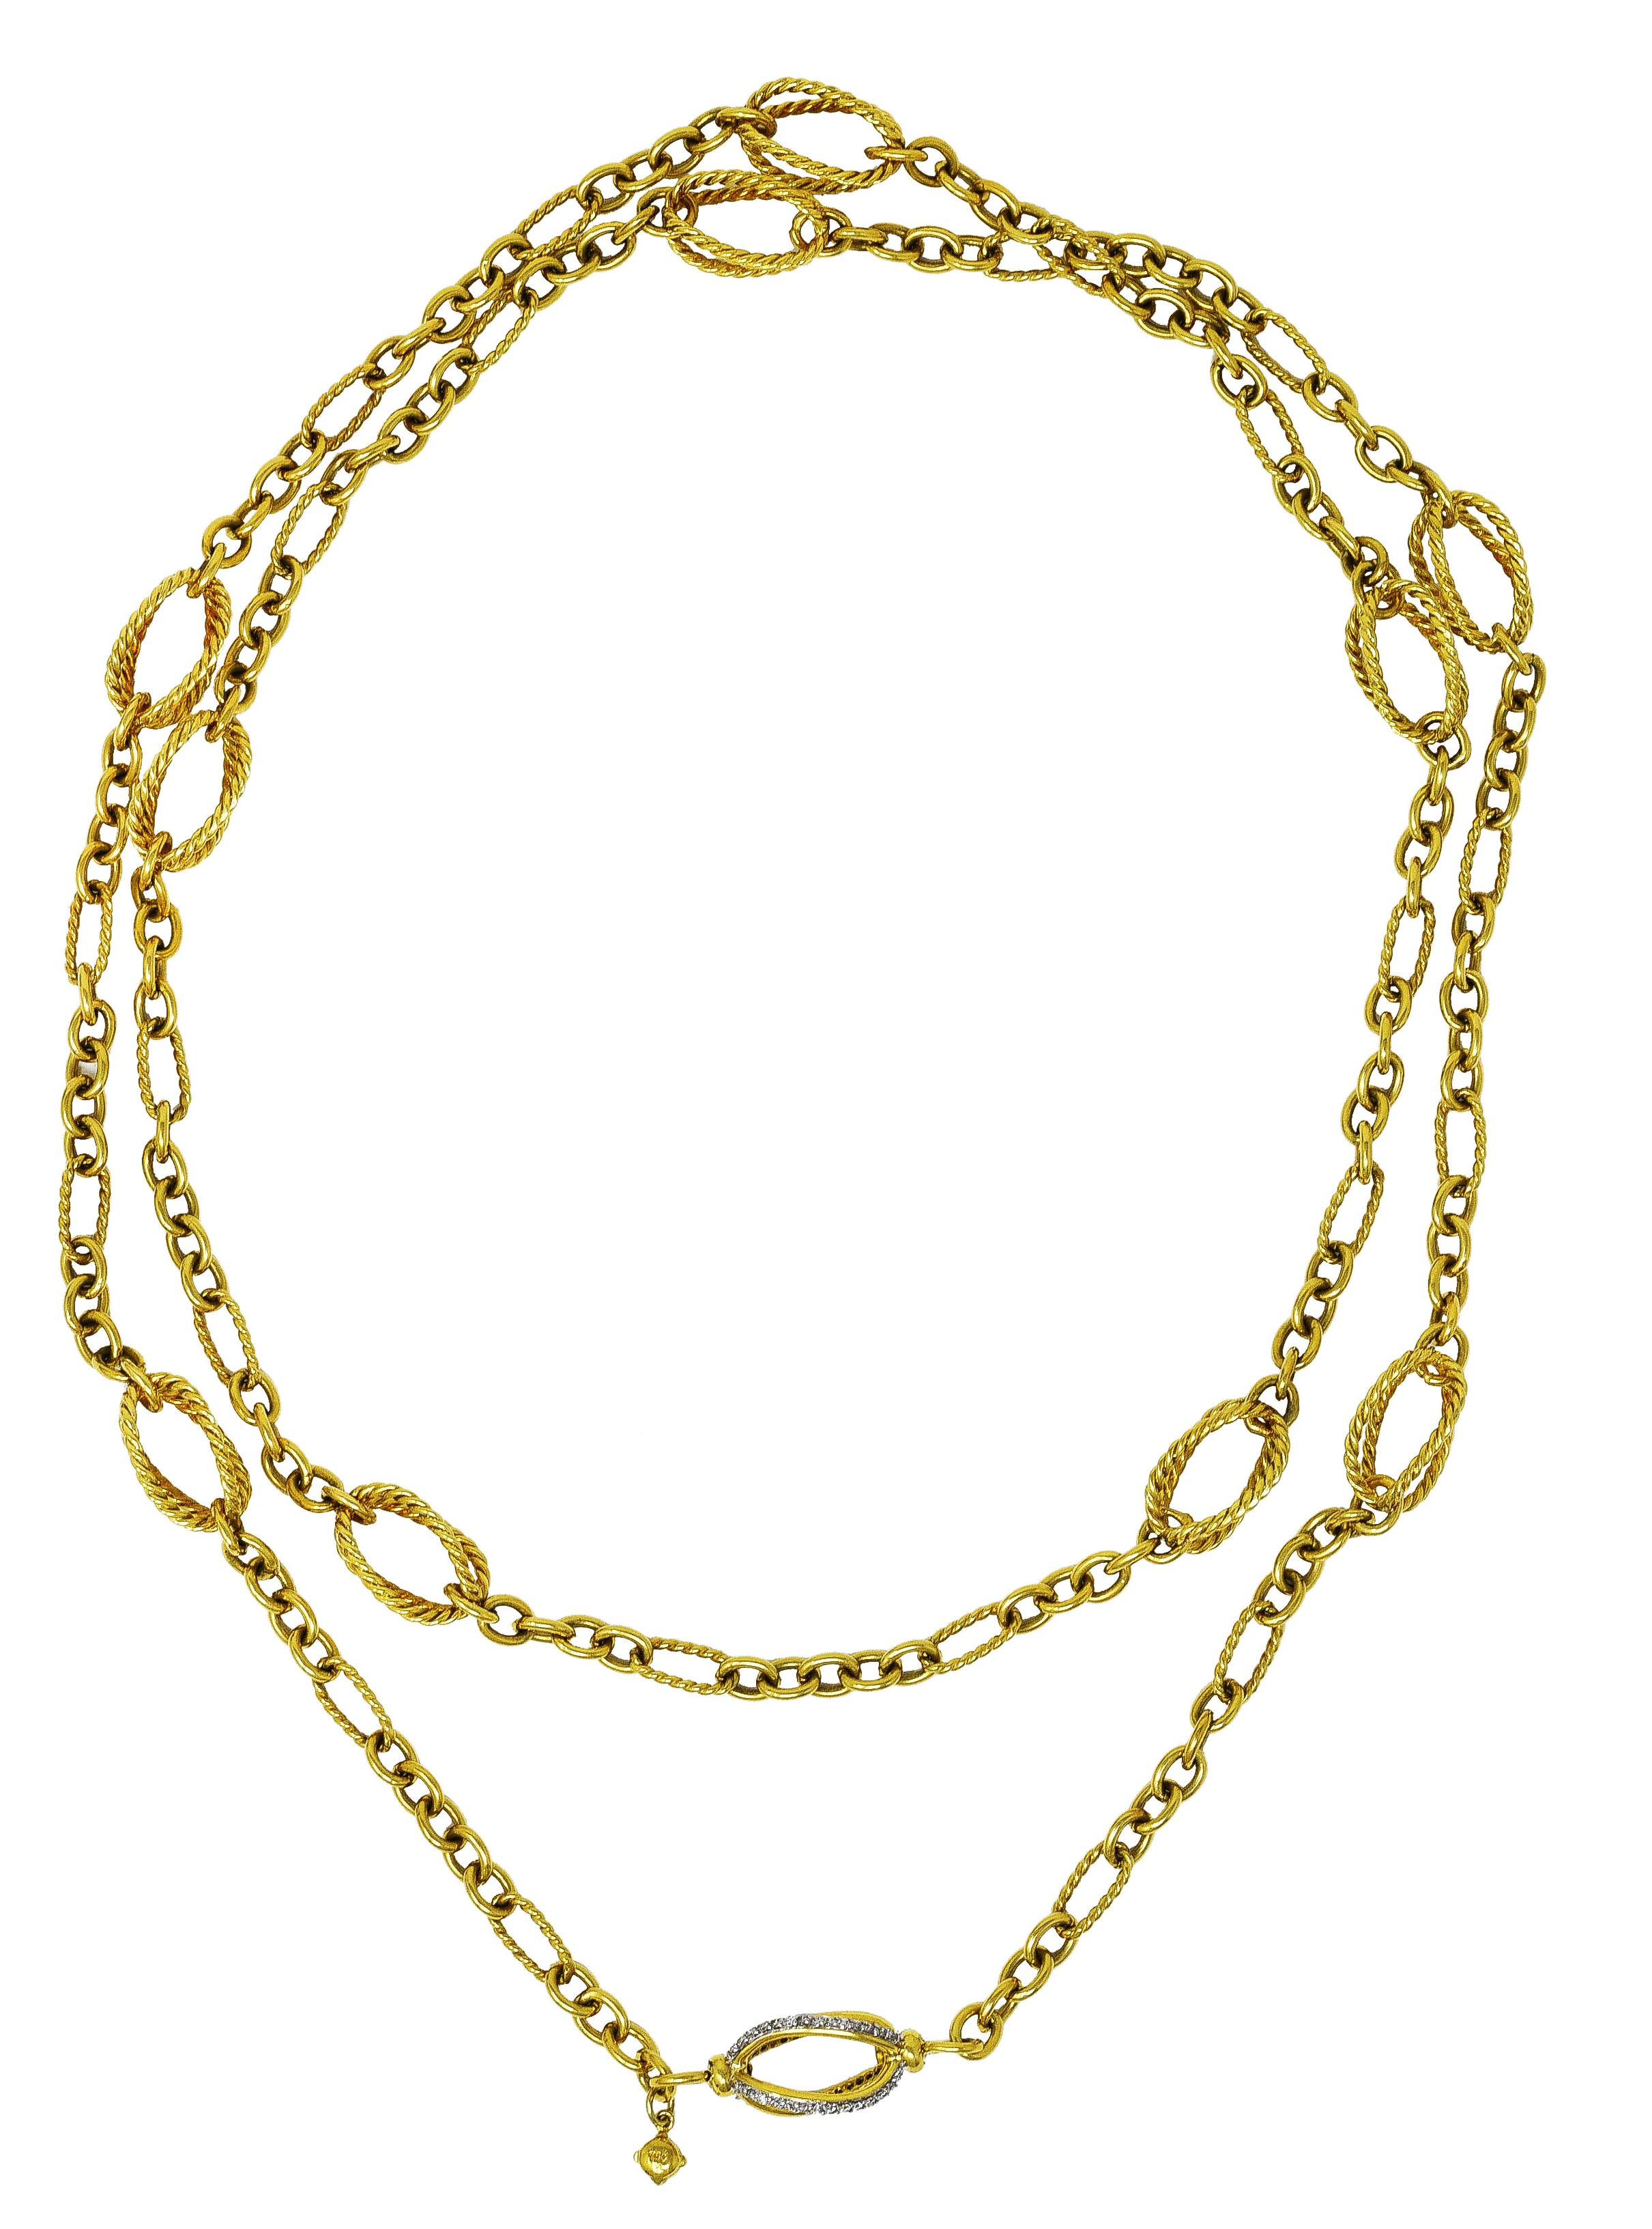 Eternity chain necklace is comprised of smooth and twisted cable links. With substantial openwork twisted cable stations. One station is highlighted with bead set round brilliant cut diamonds. Weighing in total approximately 0.55 carat - G/H color